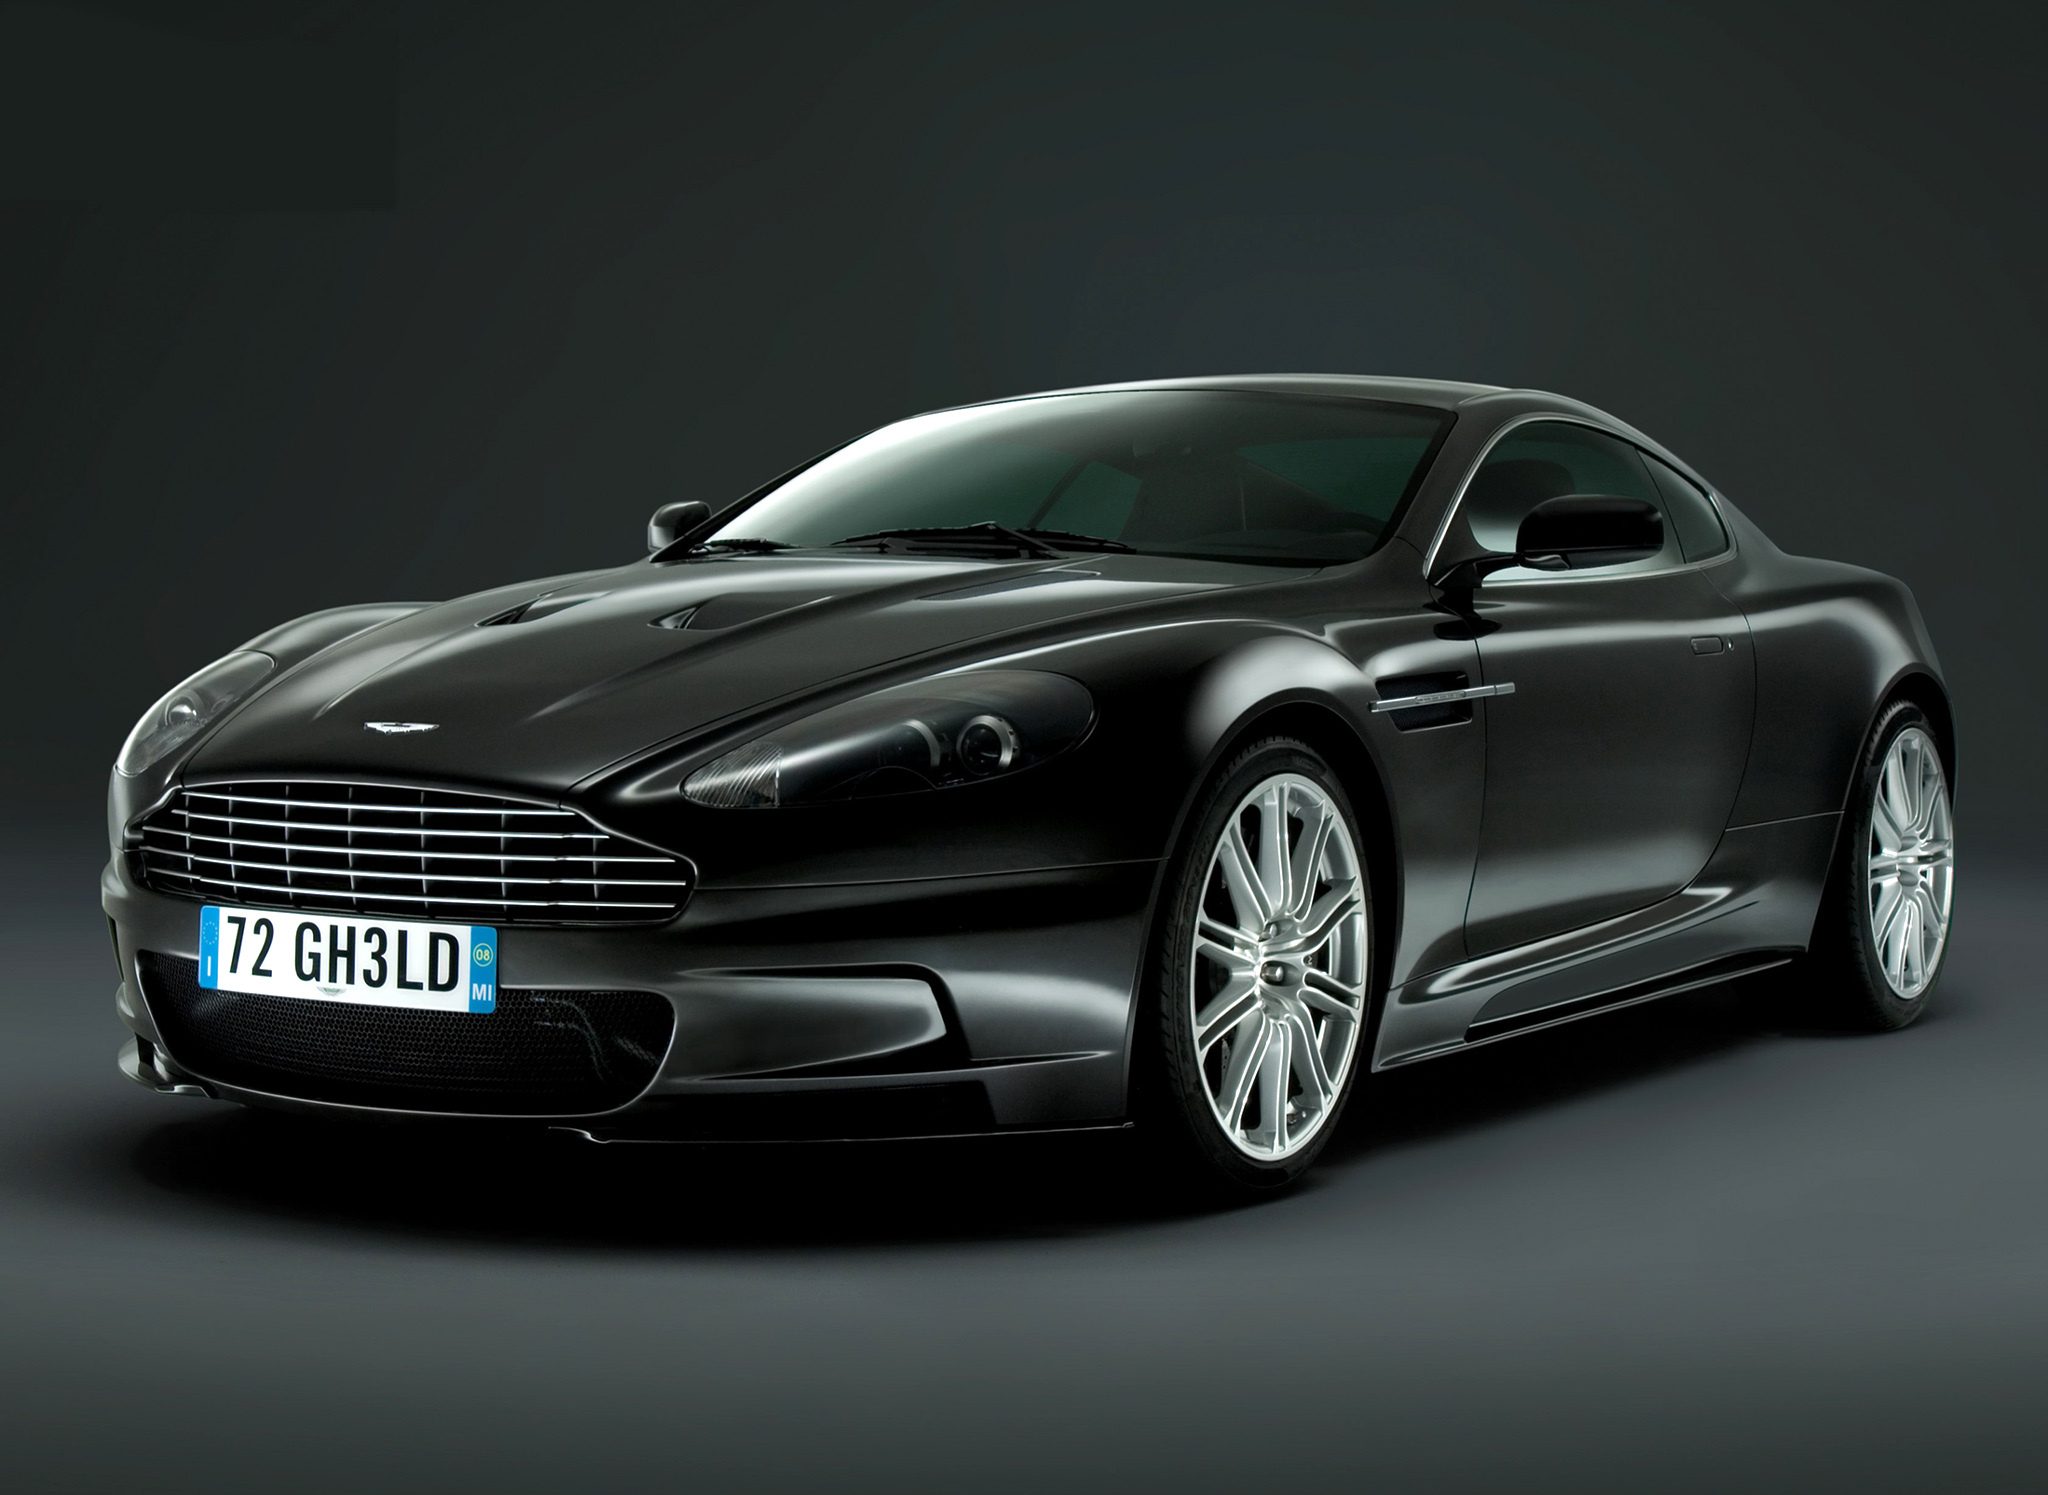 08 Aston Martin Dbs 007 Quantum Of Solace Wallpapers Supercars Net